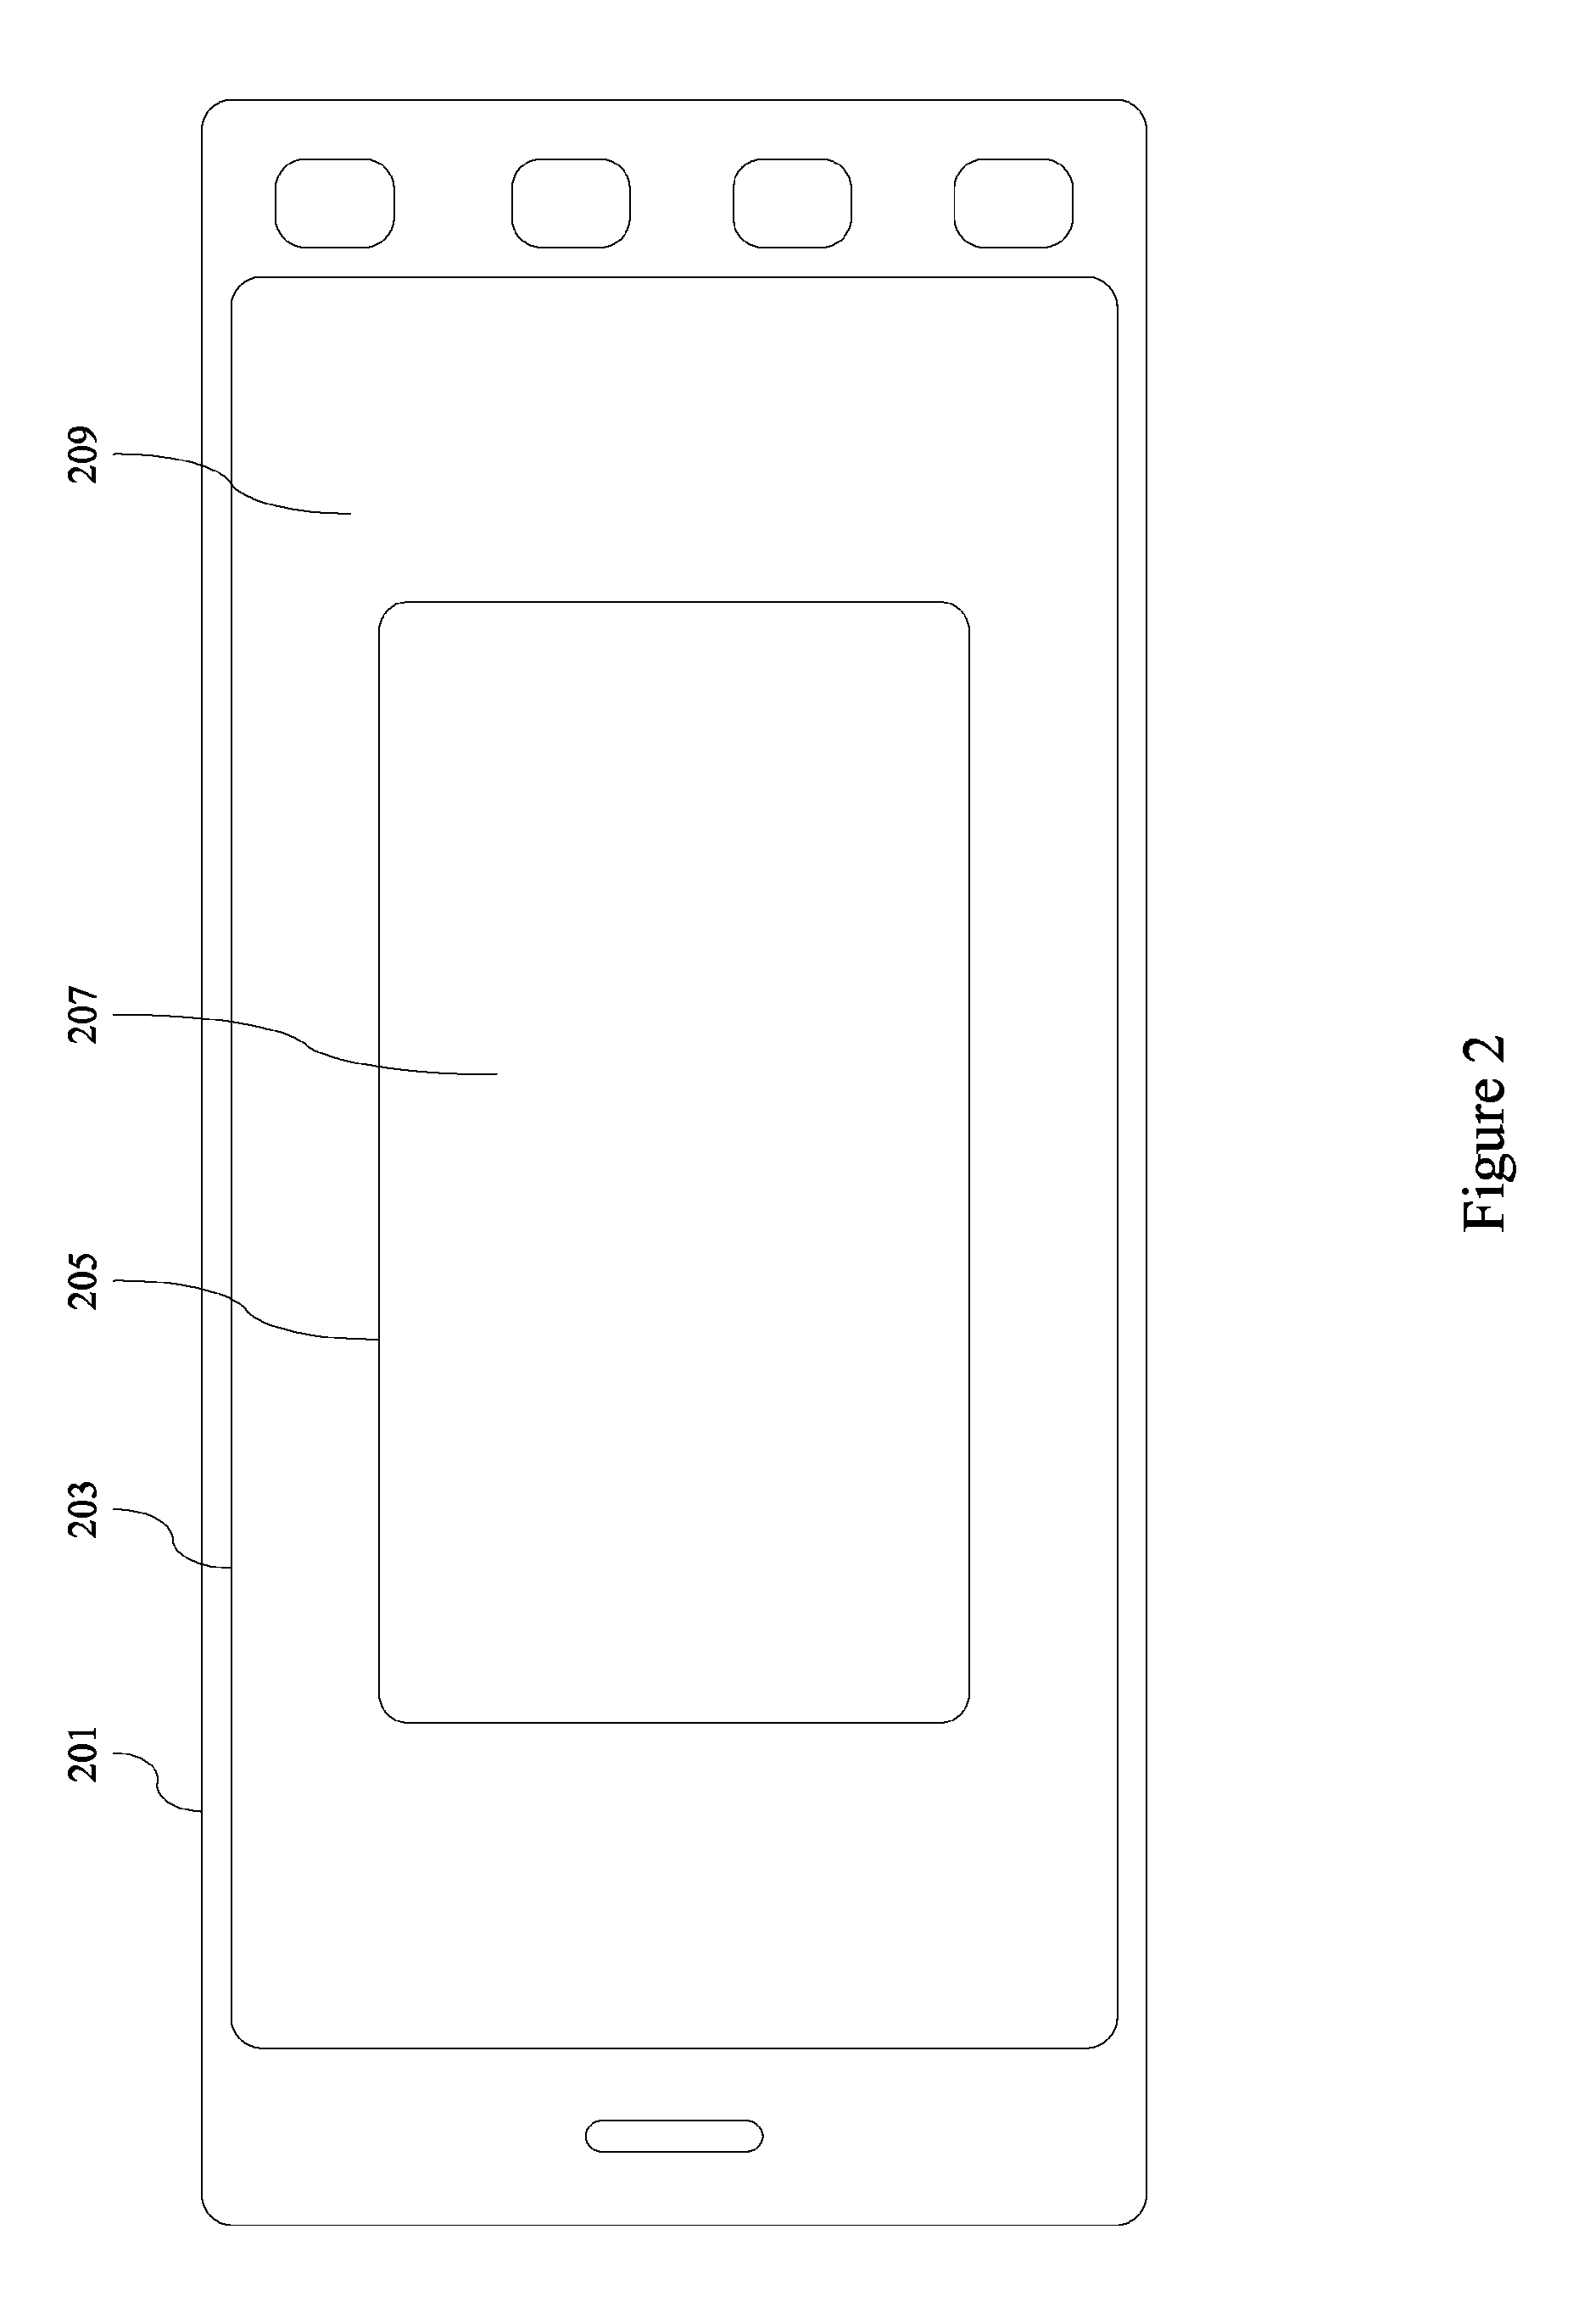 Methods and apparatus for device based prevention of kinetosis